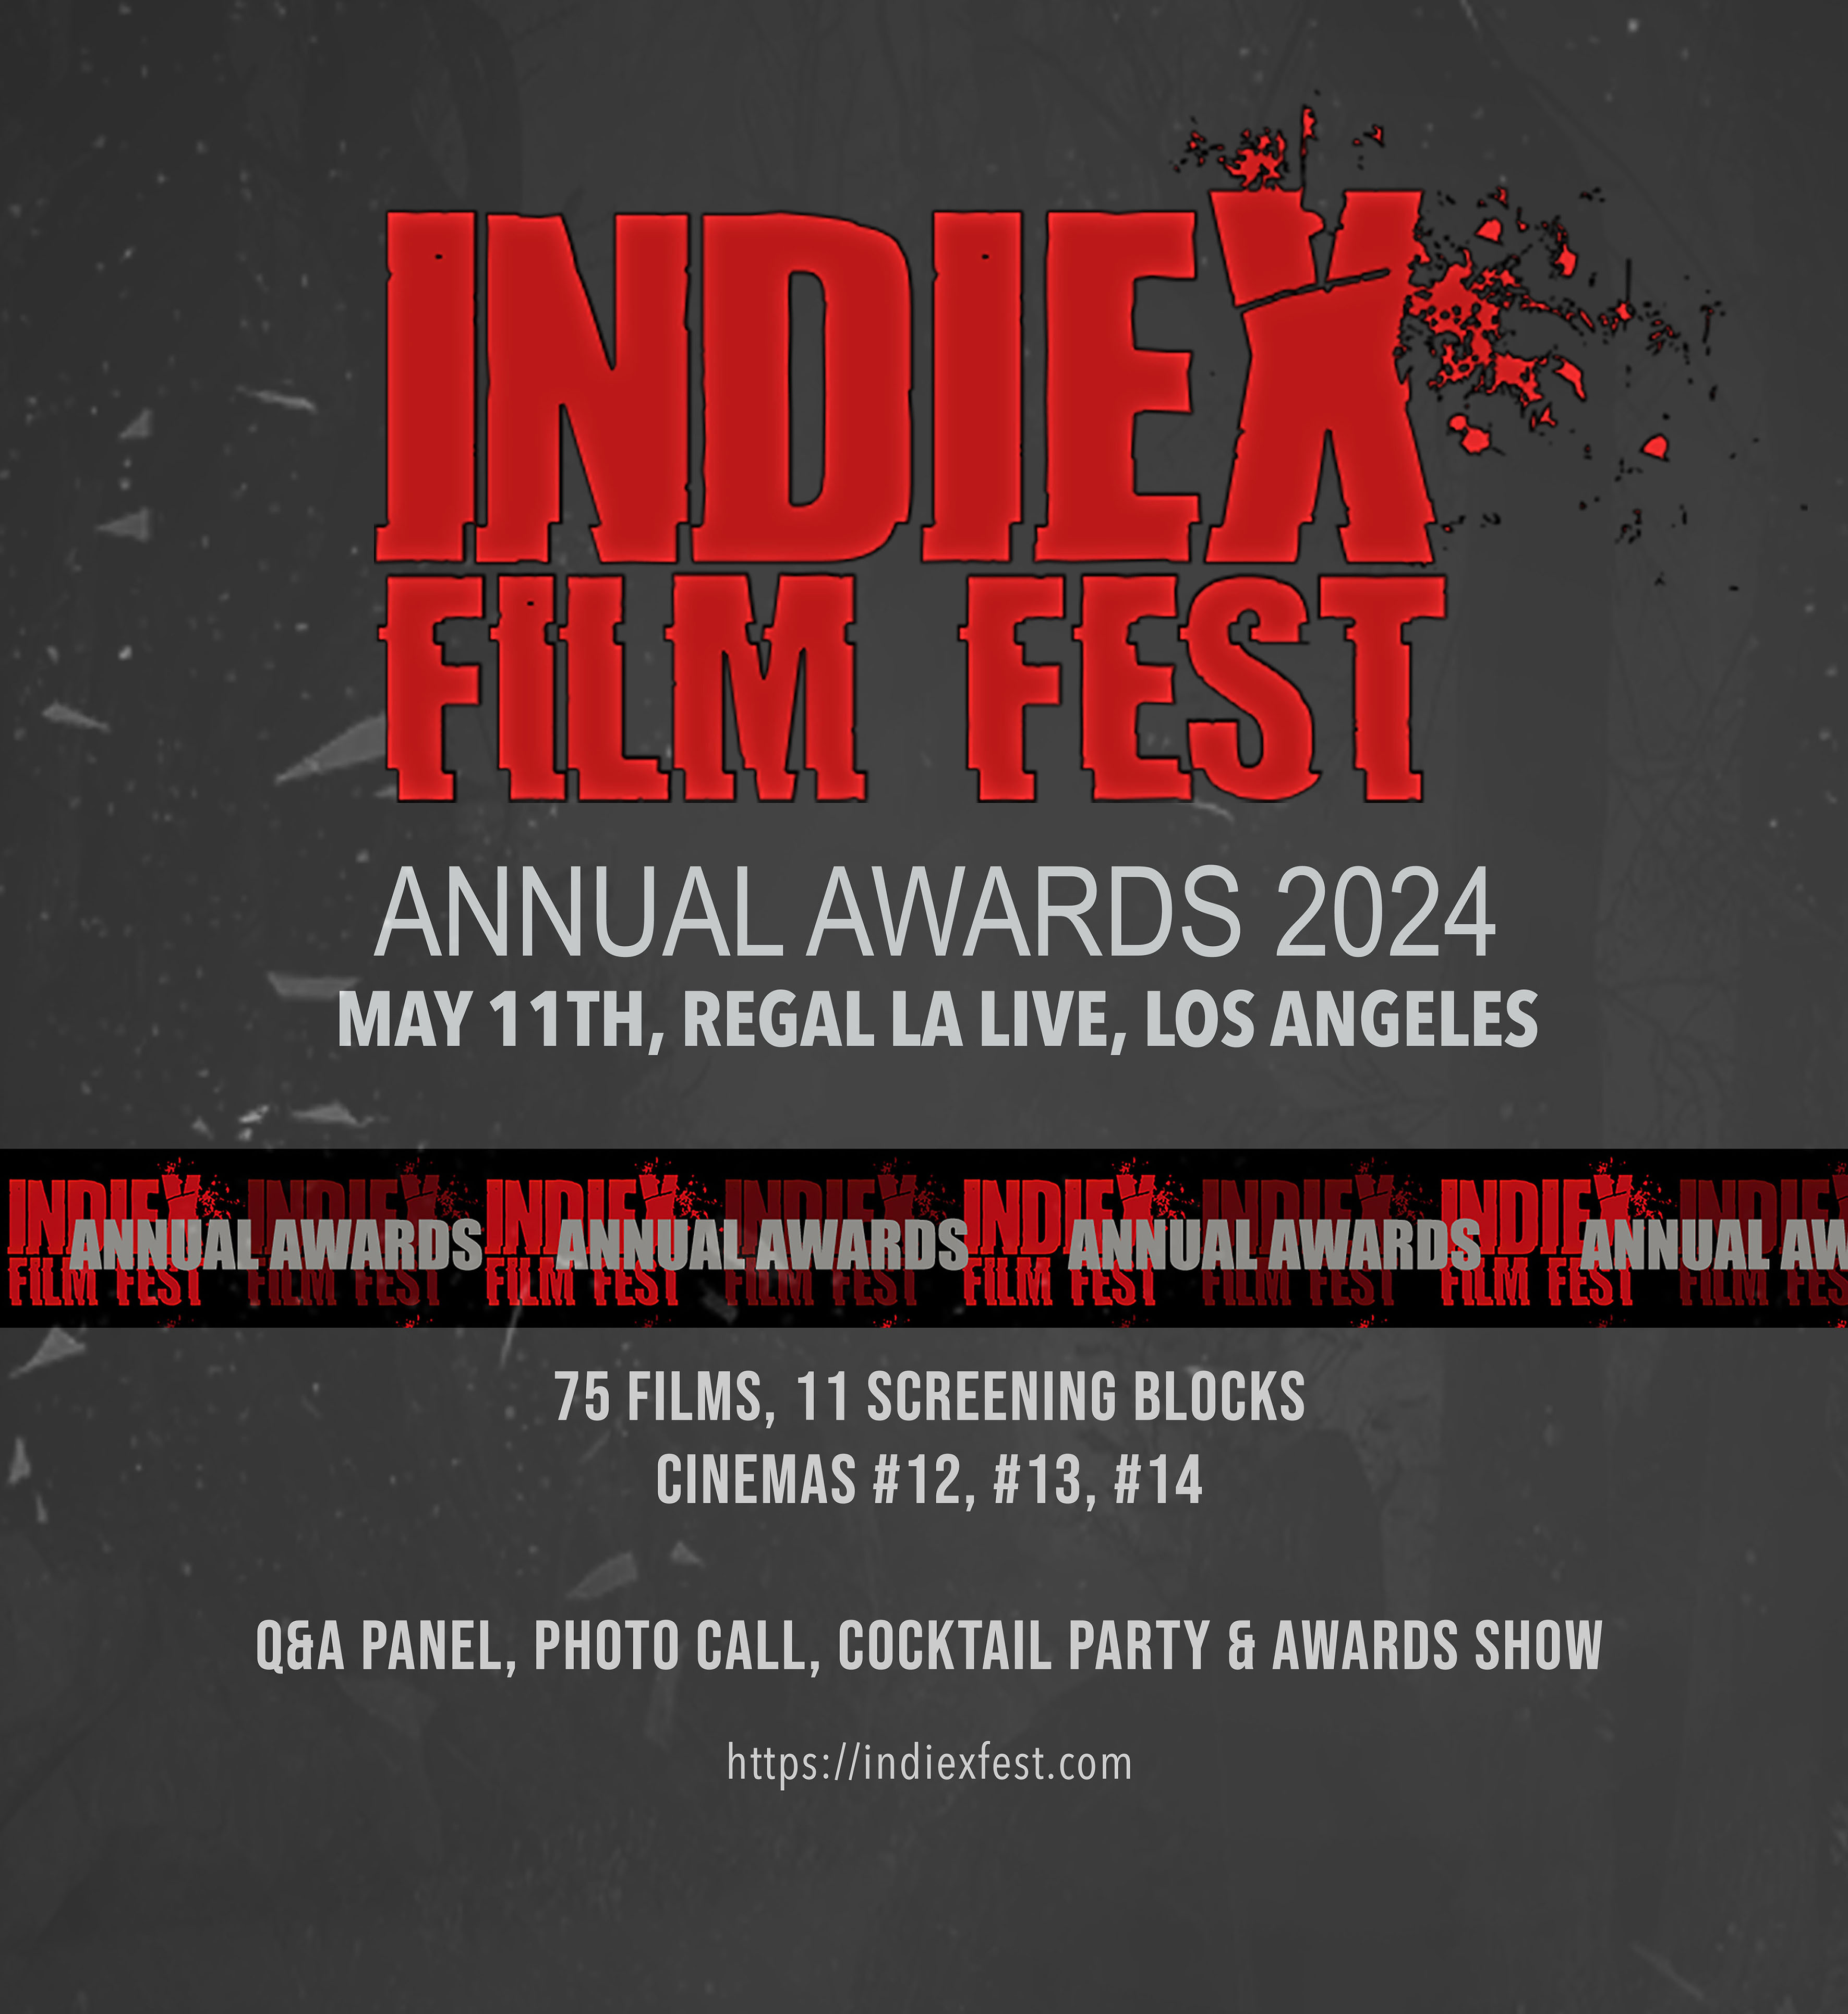 IndieX Film Fest 2024 Annual Awards gathers filmmakers from 15 countries at Regal LA Live, May 11th